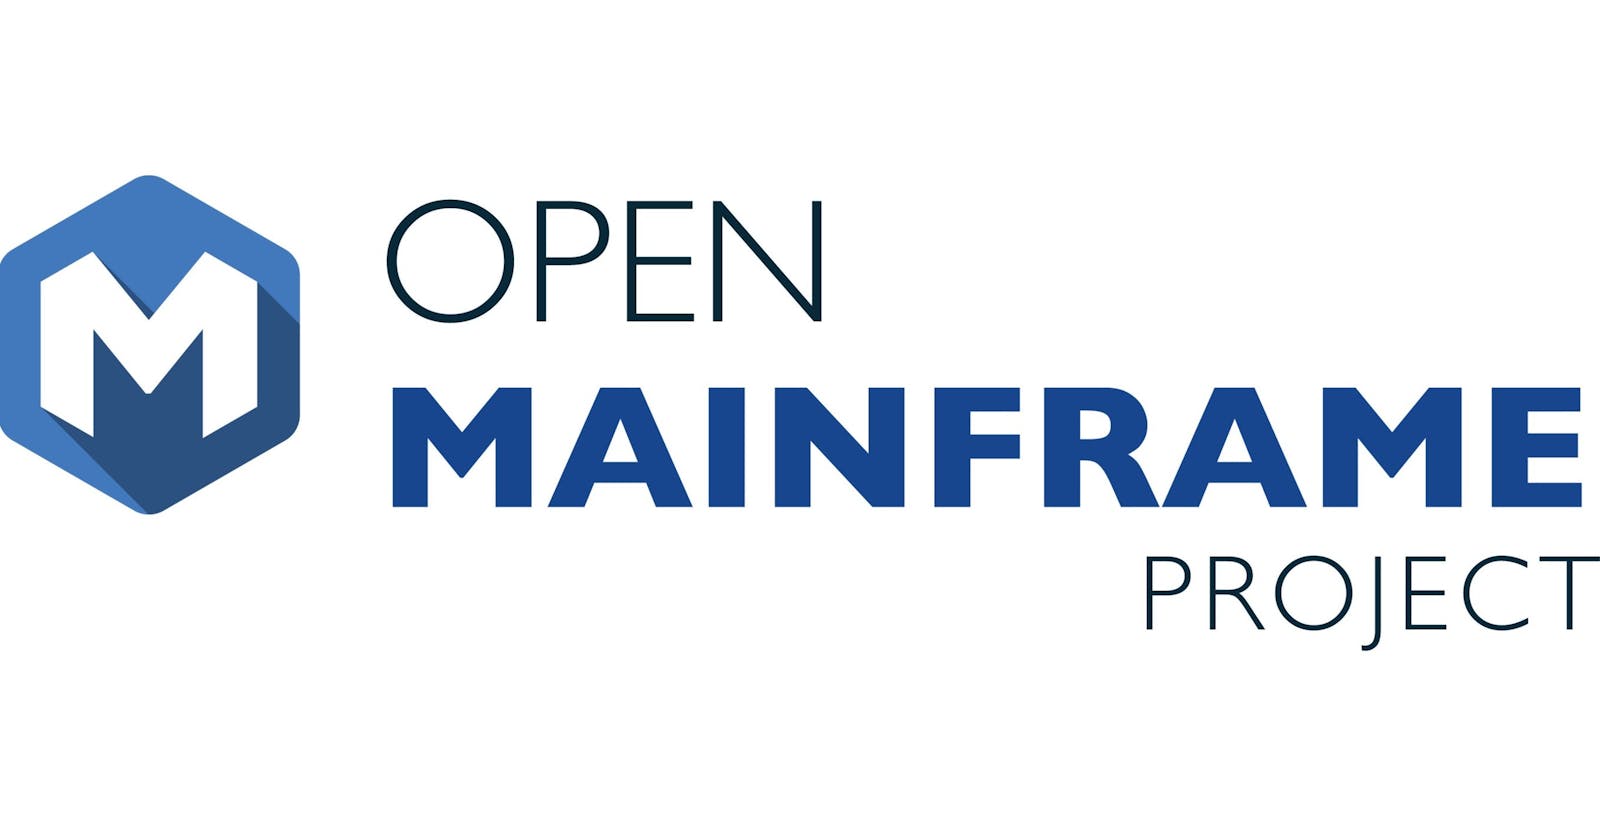 Contributing to the Open Mainframe Project